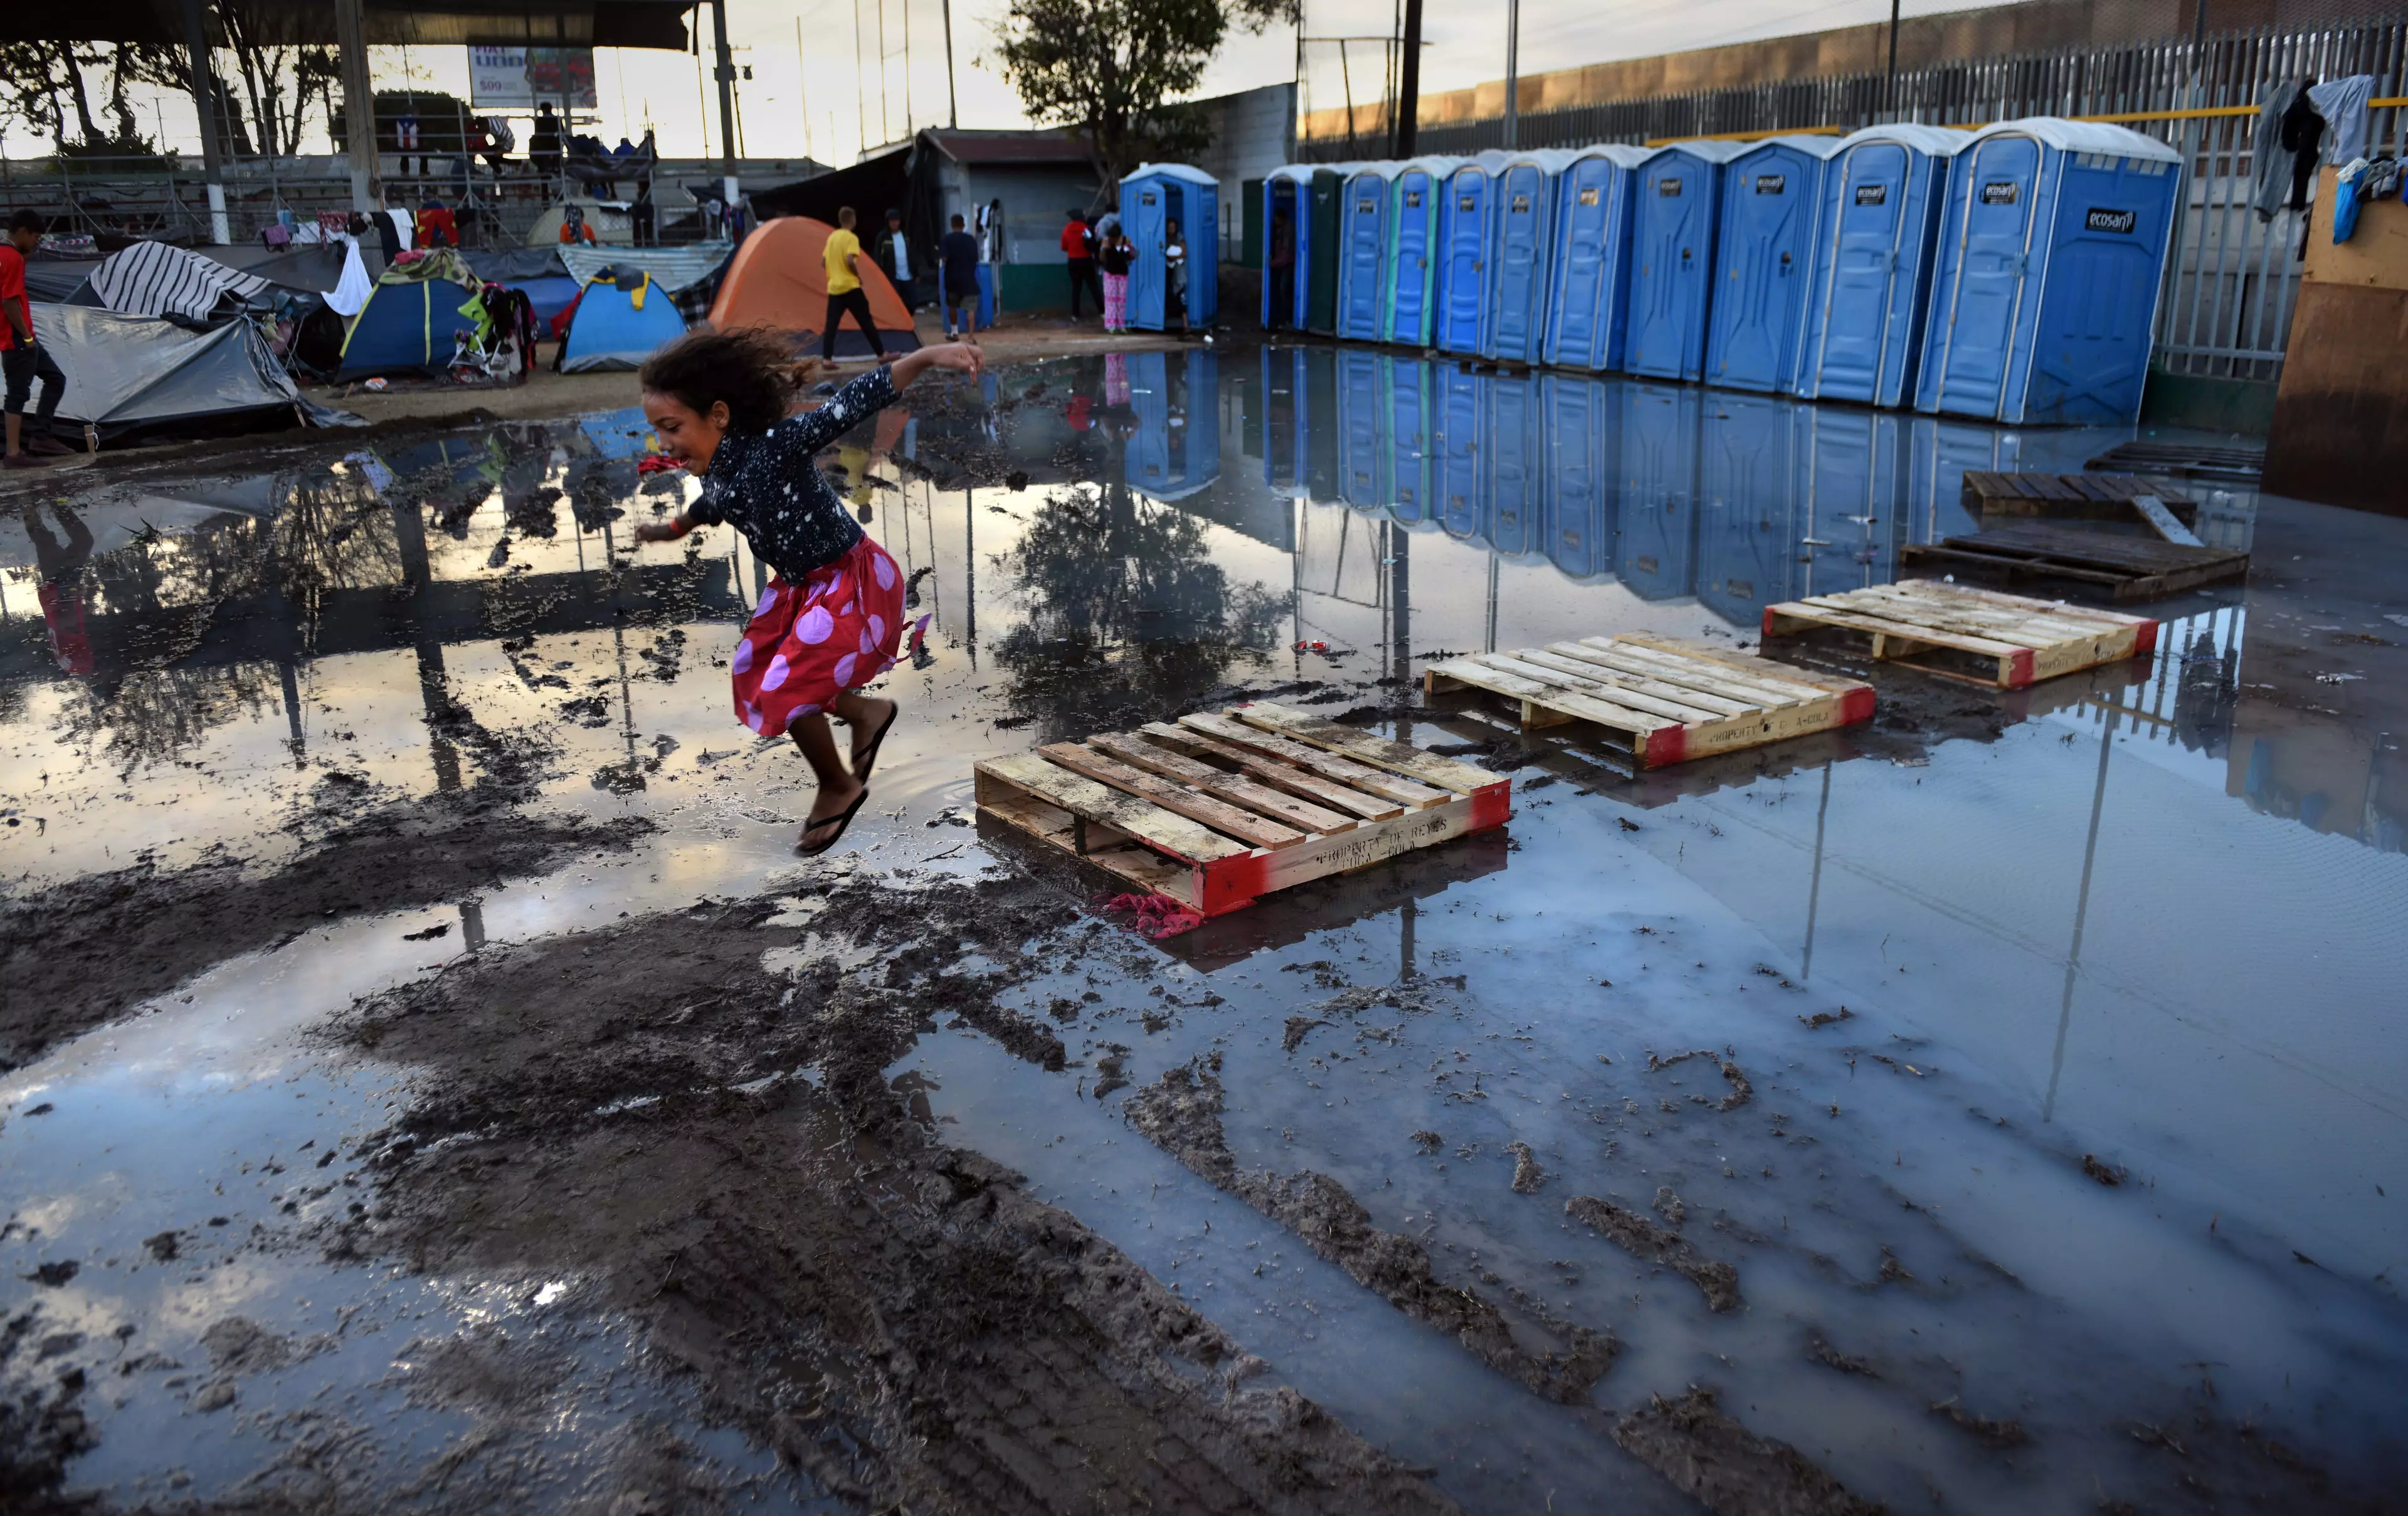 A child at a migrant camp at the Mexico/US border.